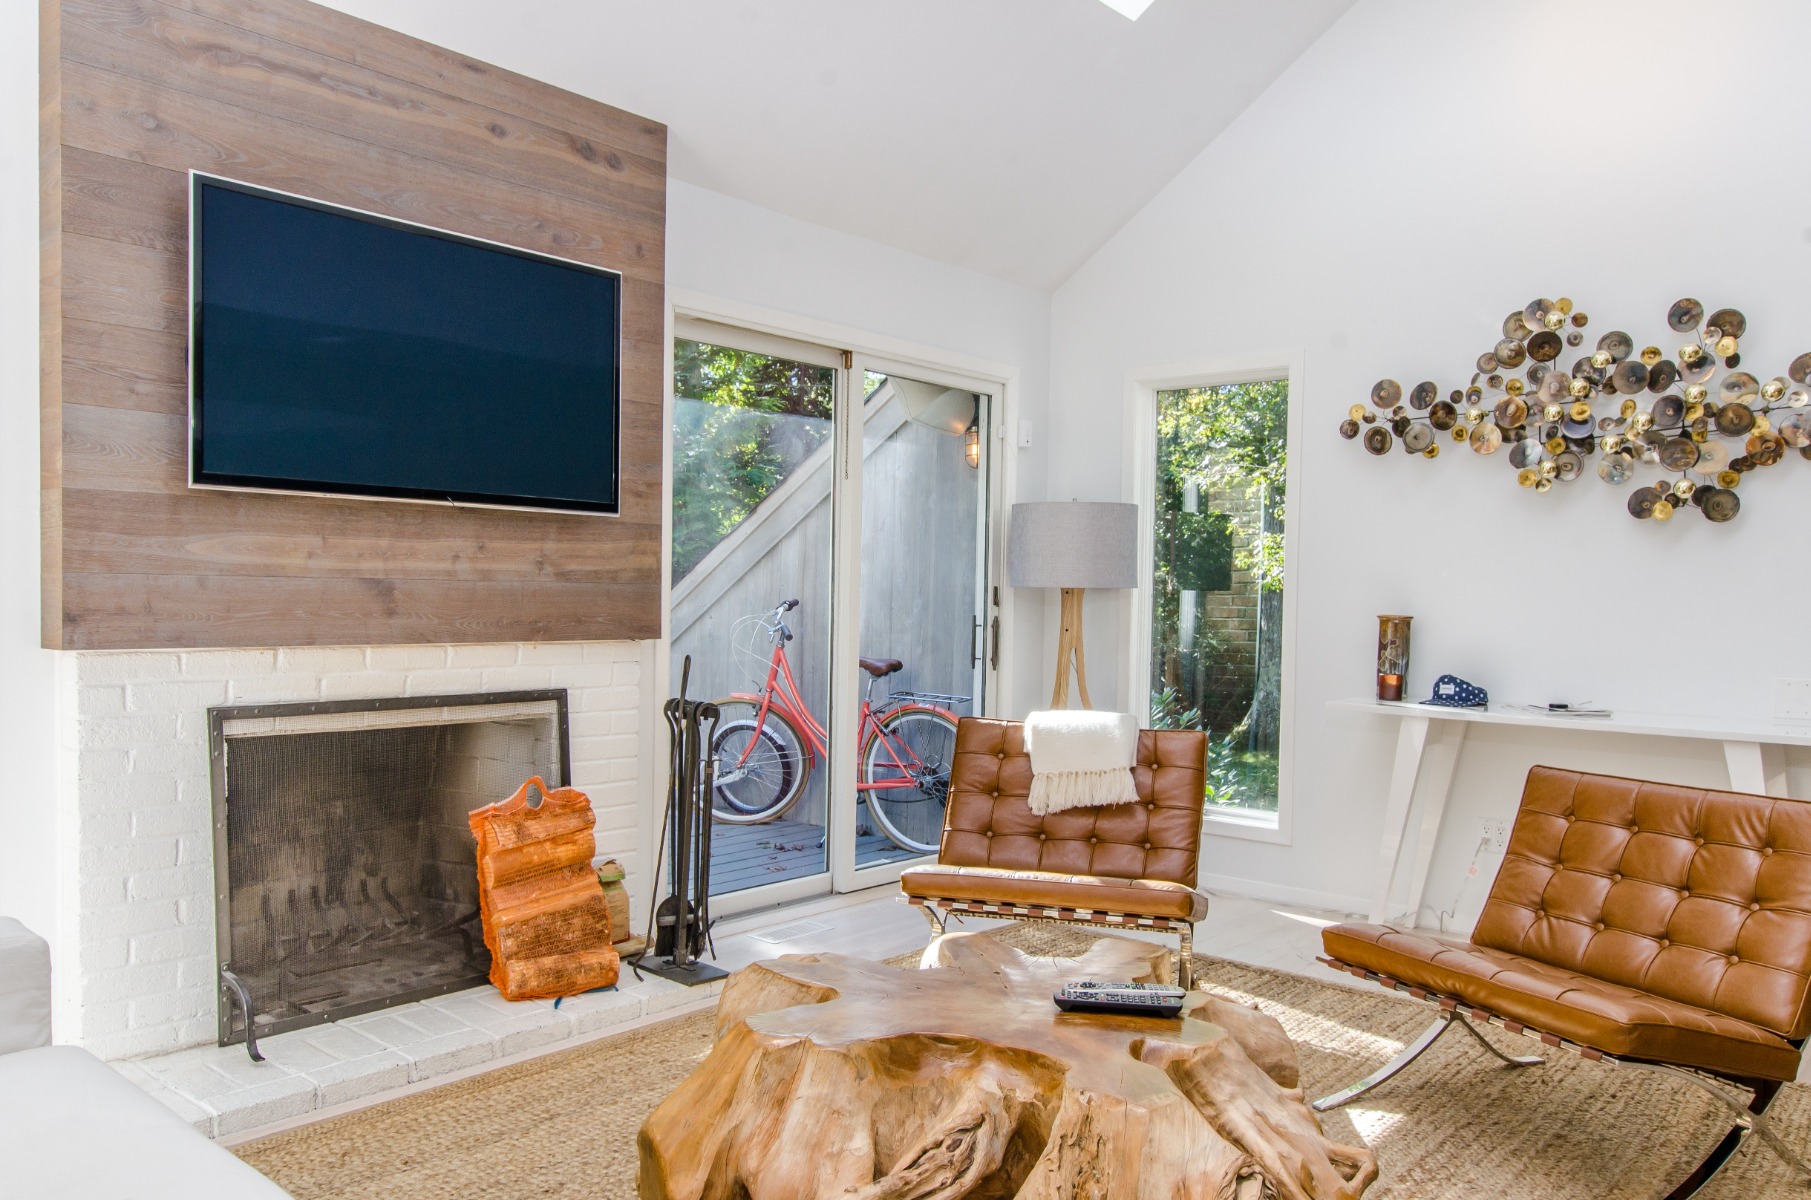 White feature fireplace wall in a living room with TV and two brown chairs